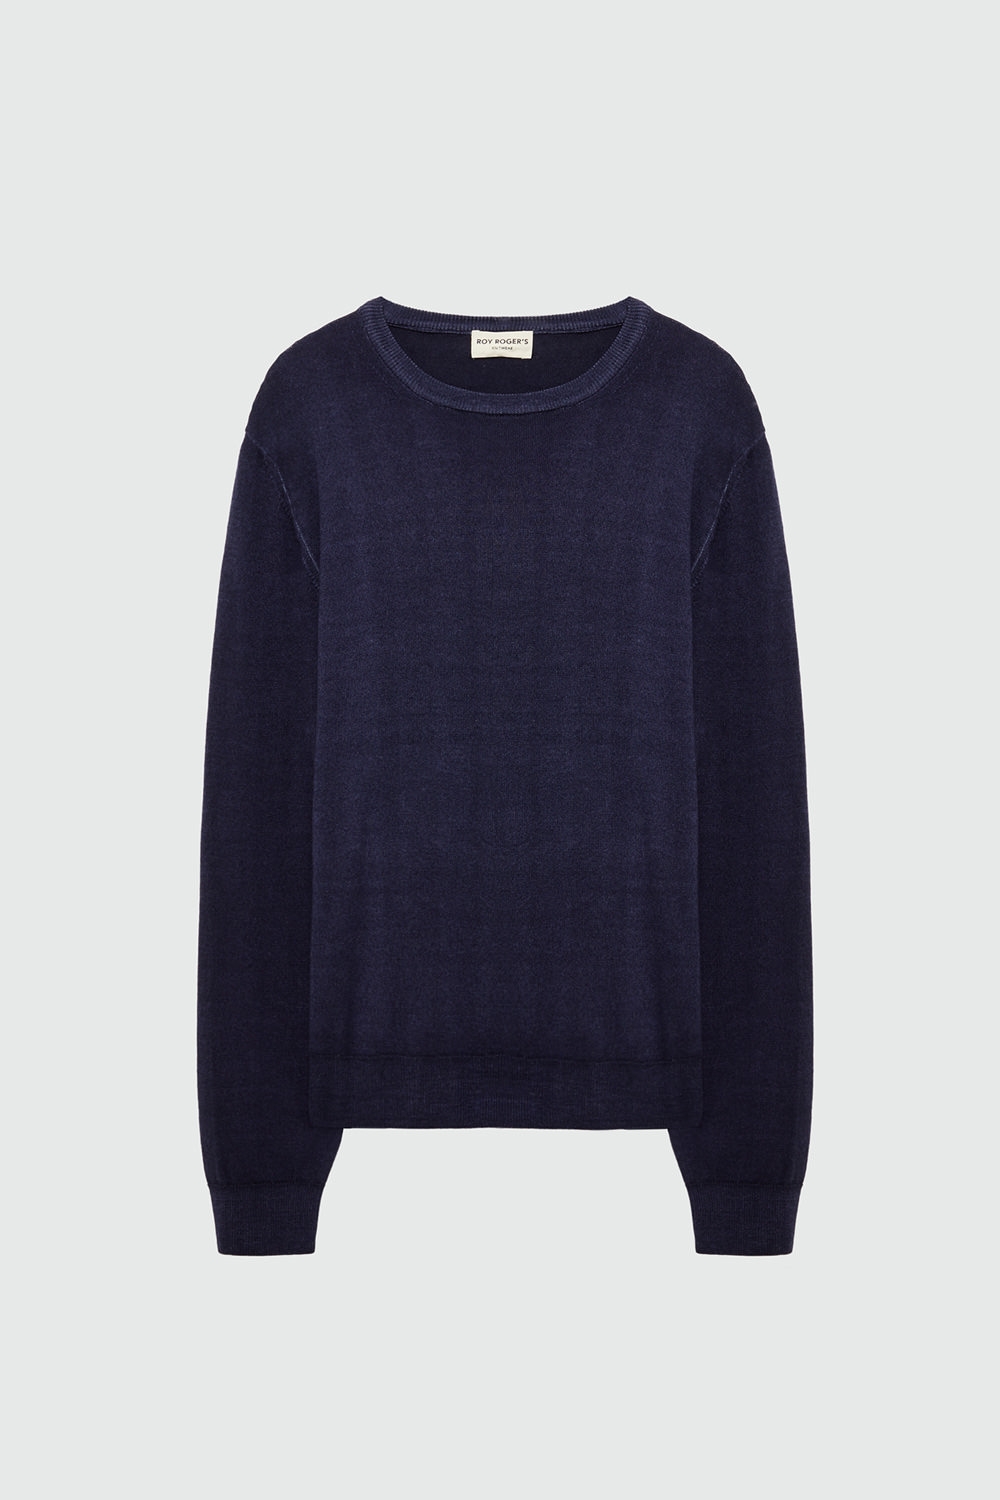 ROY ROGERS: CREW NECK SWEATER IN STONE WASHED MERINO WOOL